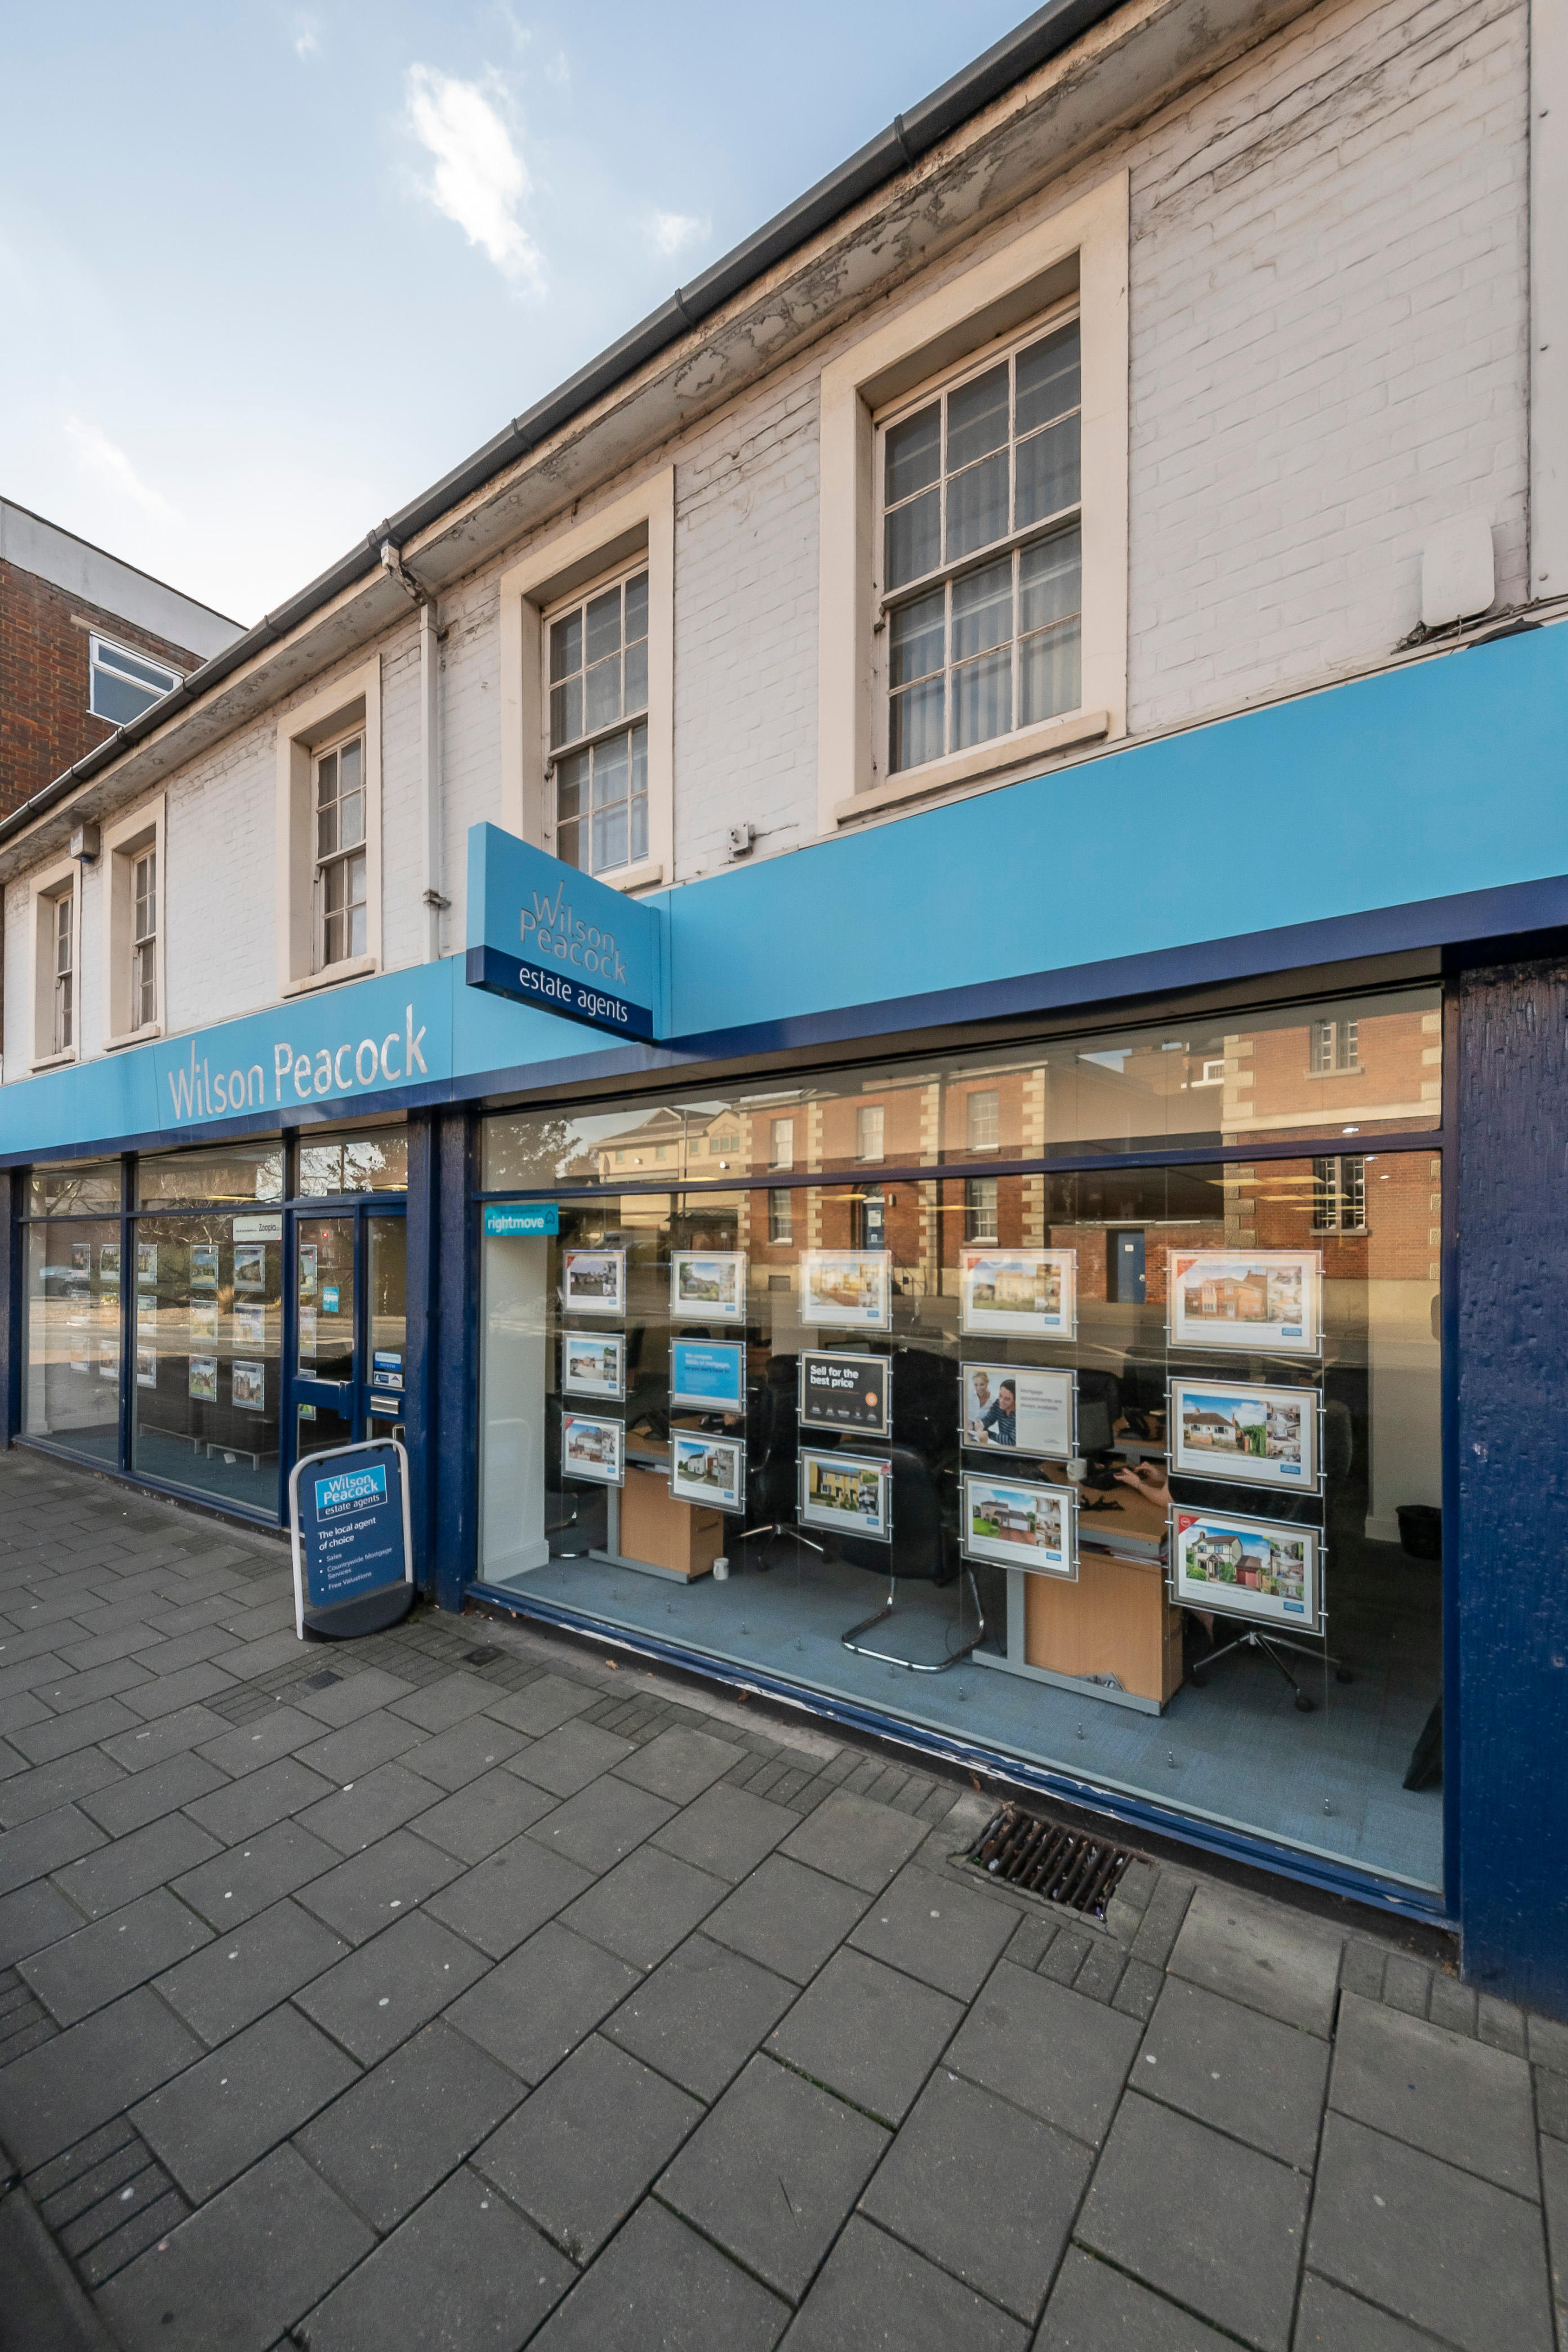 Images Wilson Peacock Sales and Letting Agents Bedford